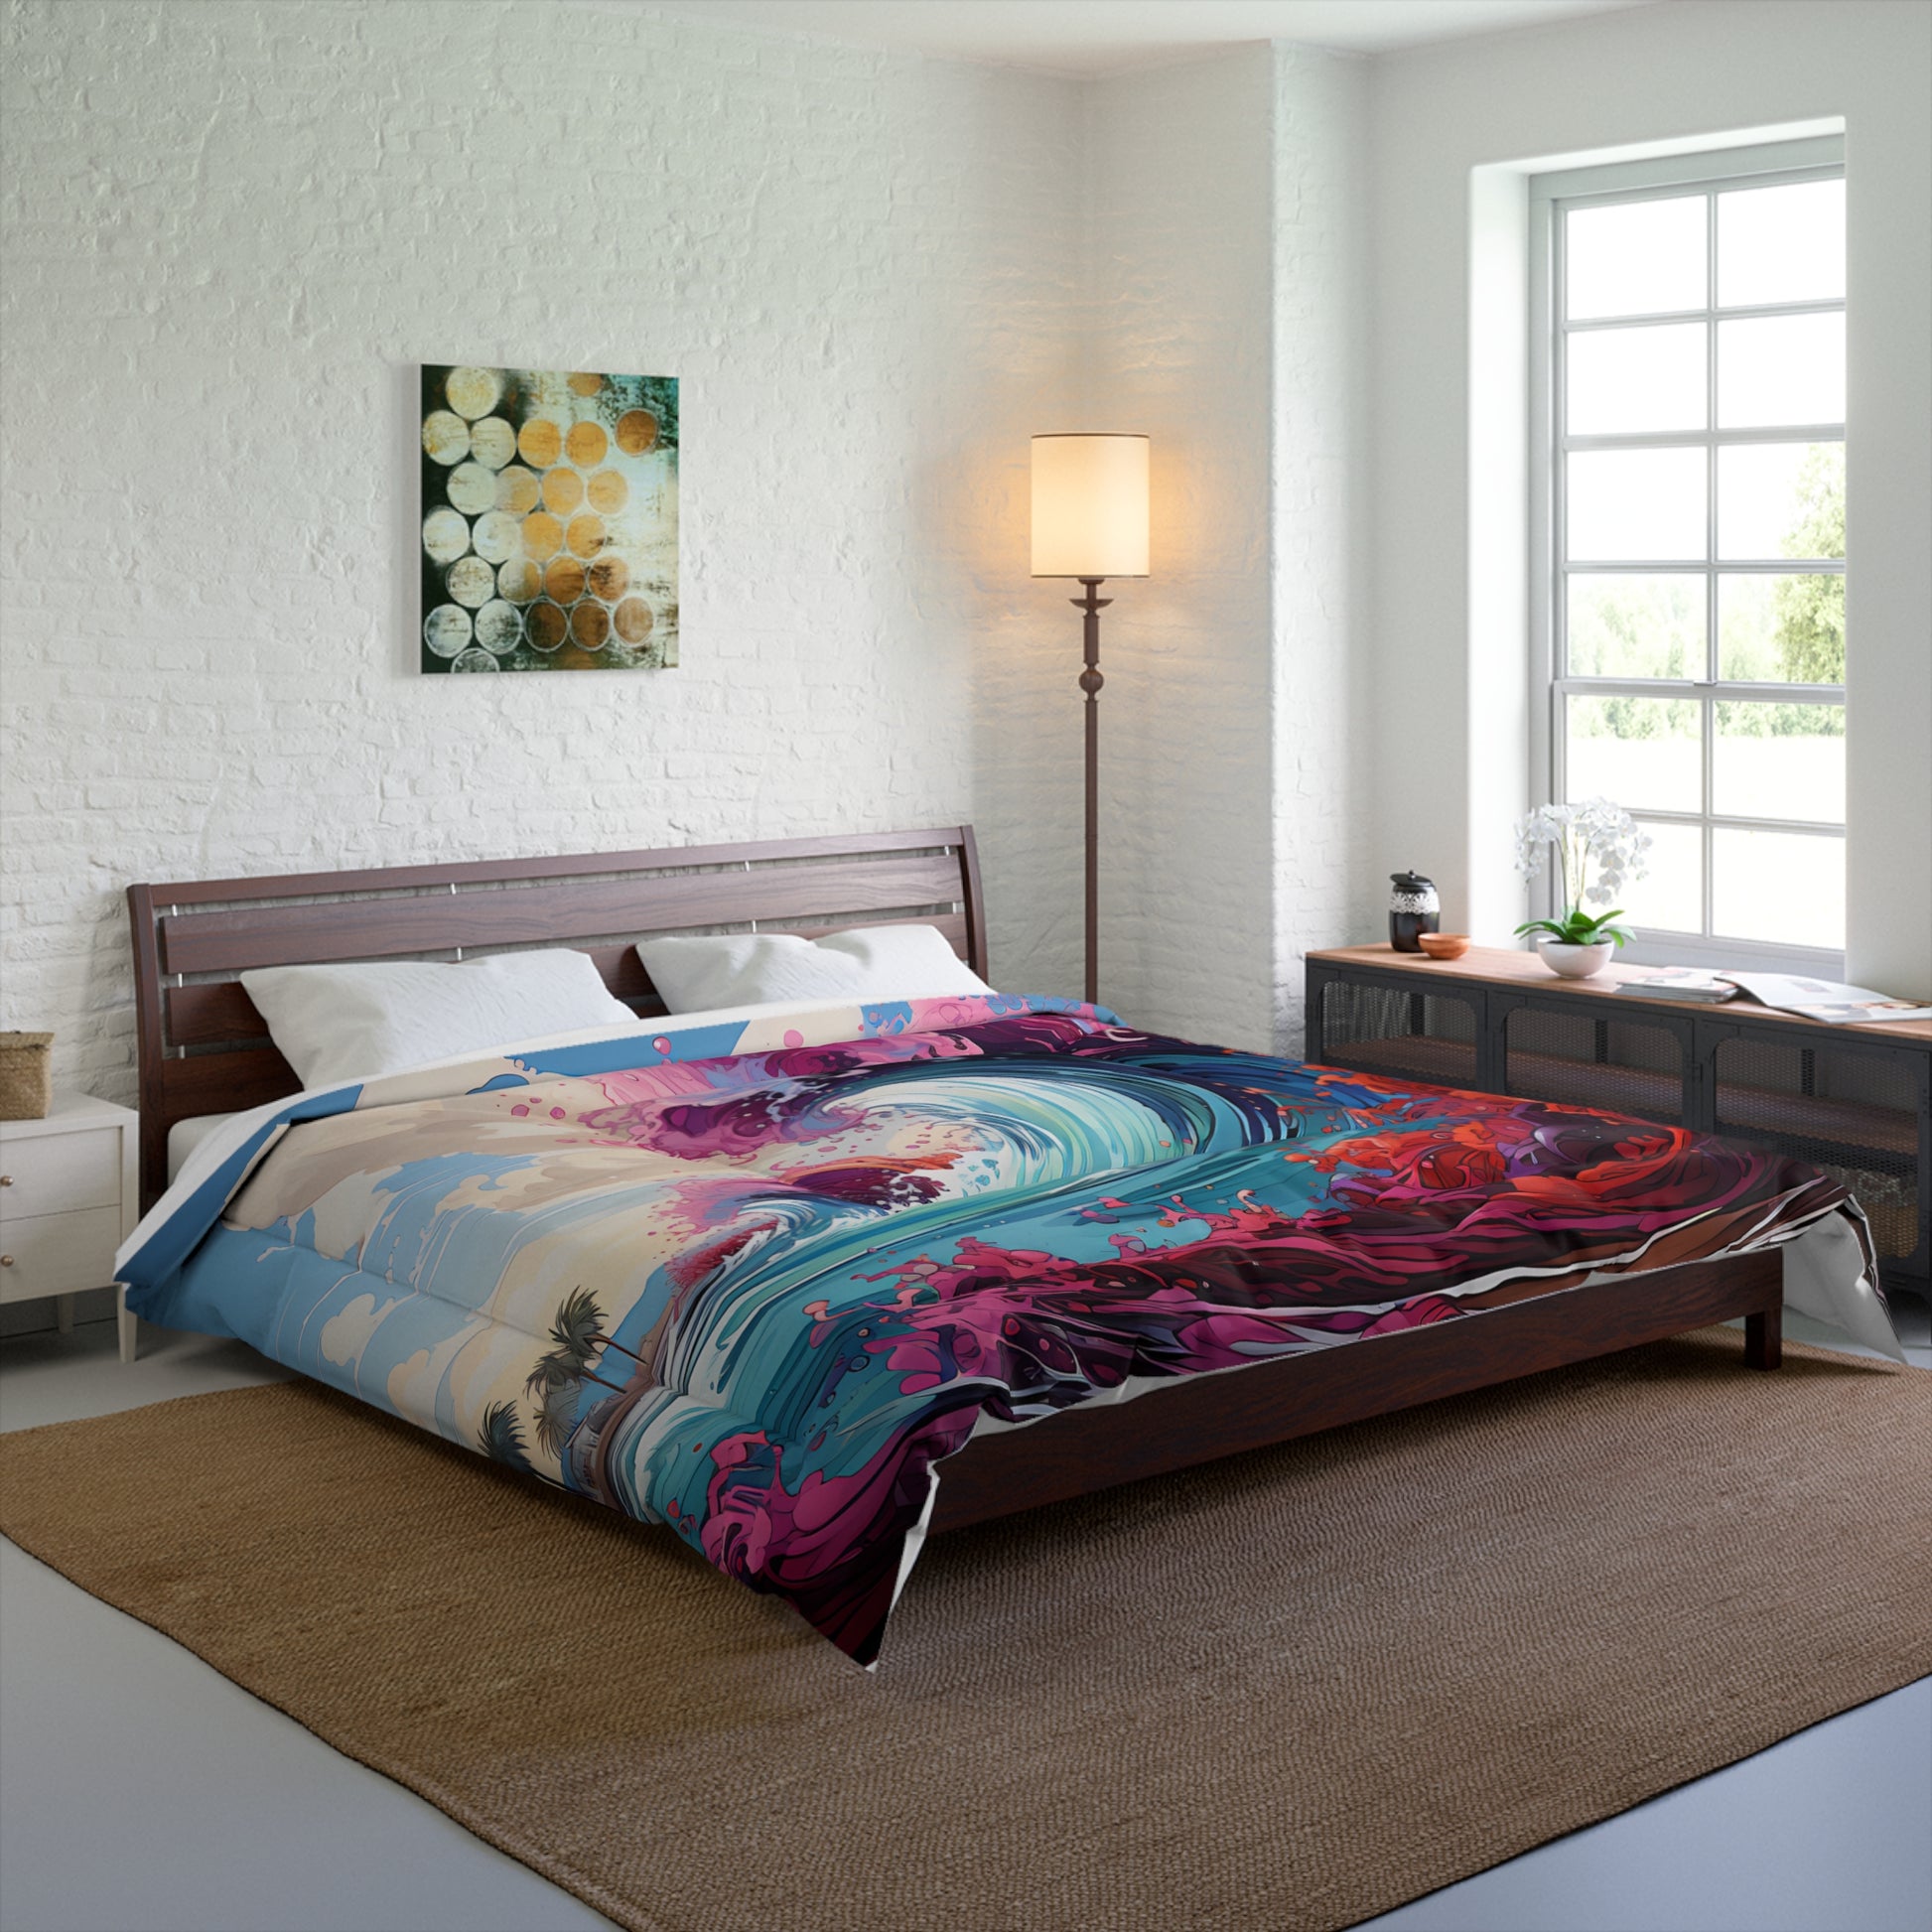 Wrap yourself in the Psychedelic Magic with our Waves Design #003 Comforter. Sleep in artistry, exclusively at Stashbox.ai